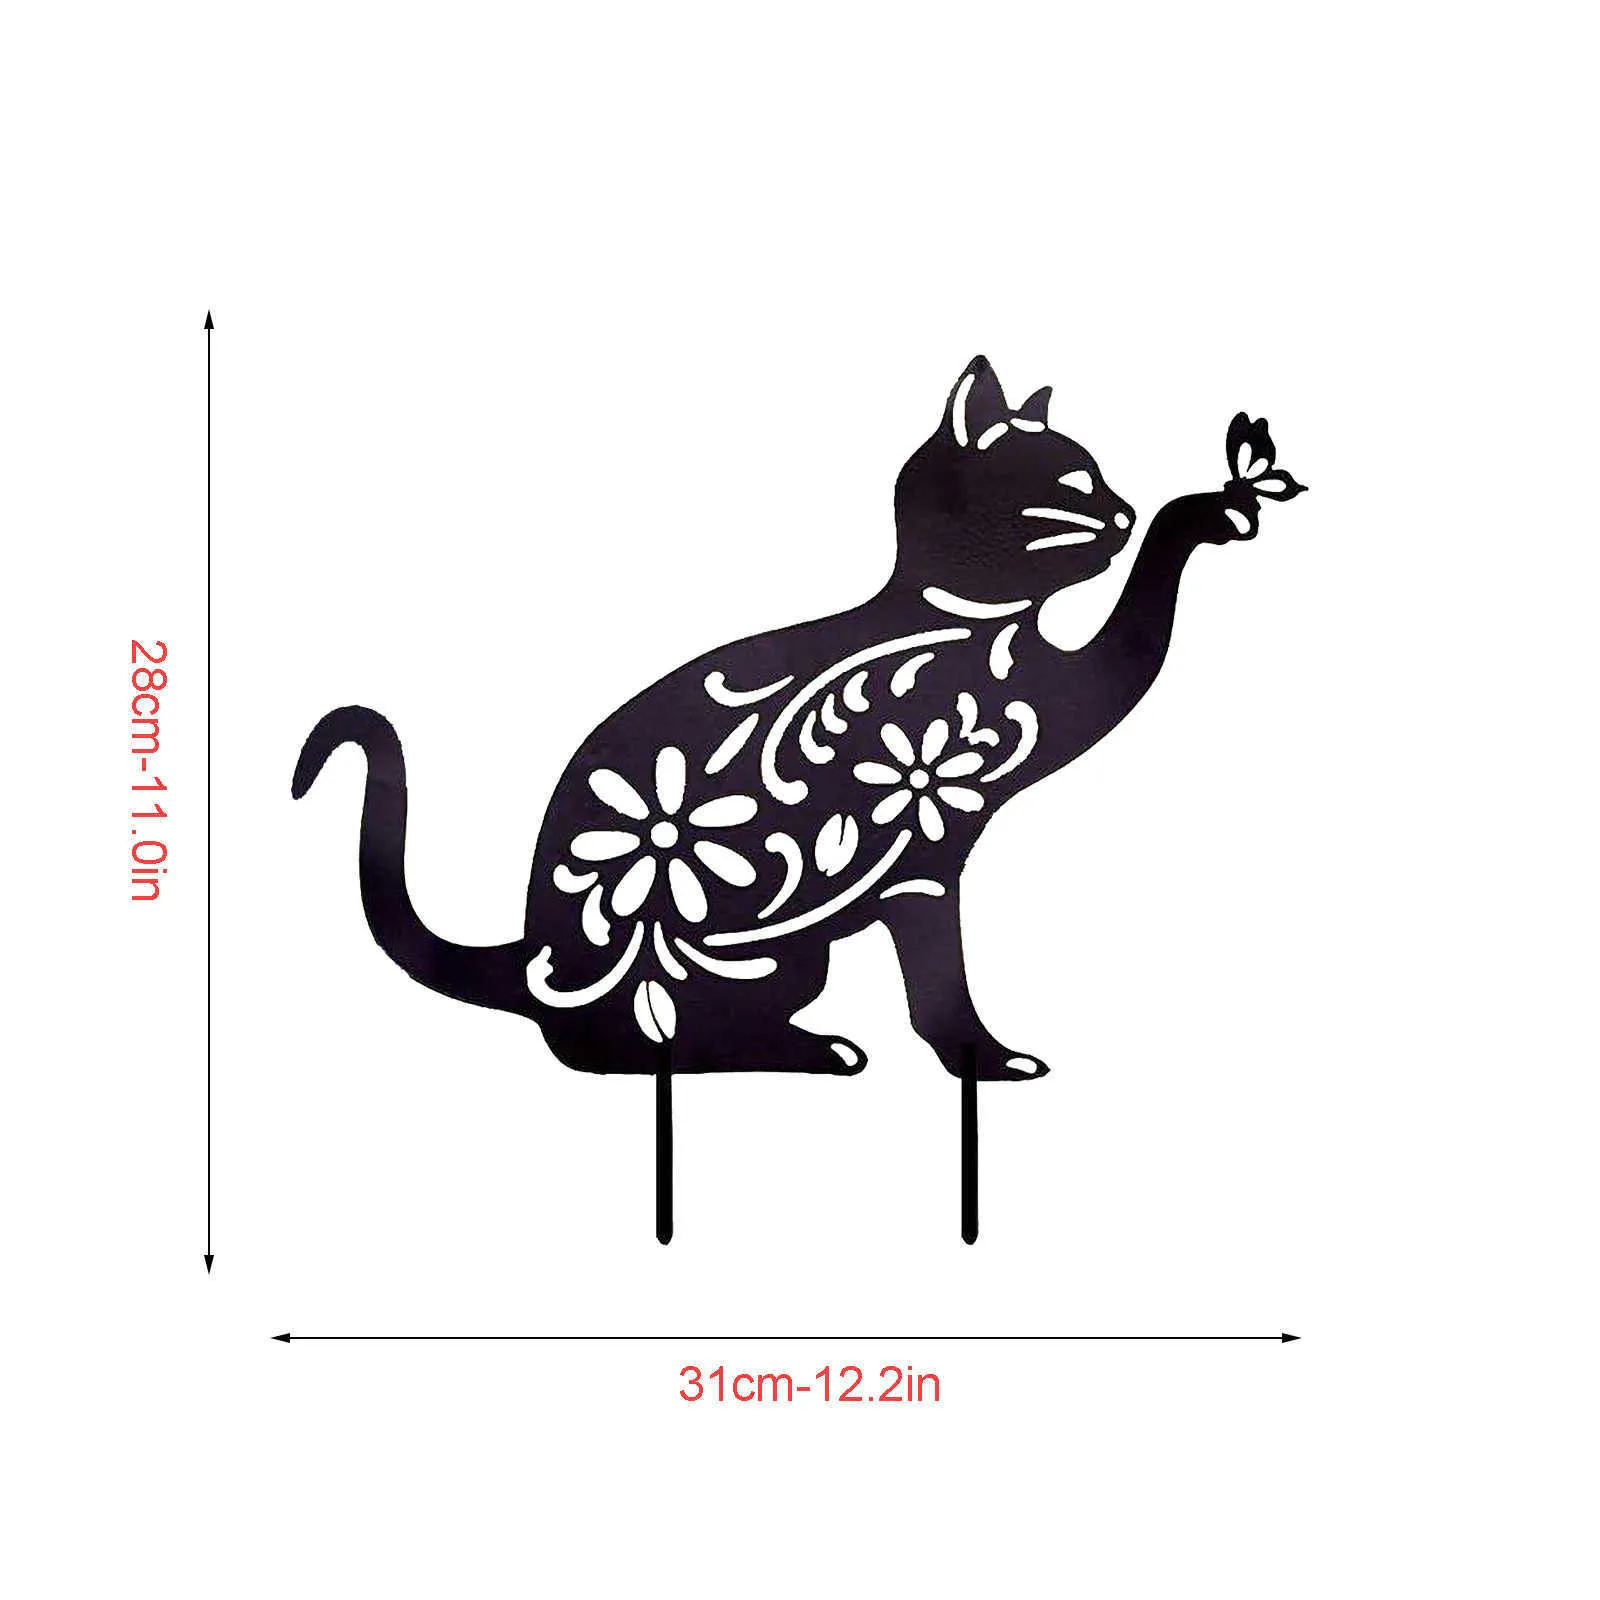 Cat And Butterfly Yard Art Metal Hollow Out Cat Ornaments Garden Decoration Outdoor Wrought Iron Cat Plugin Backyard Decoration Q3588976